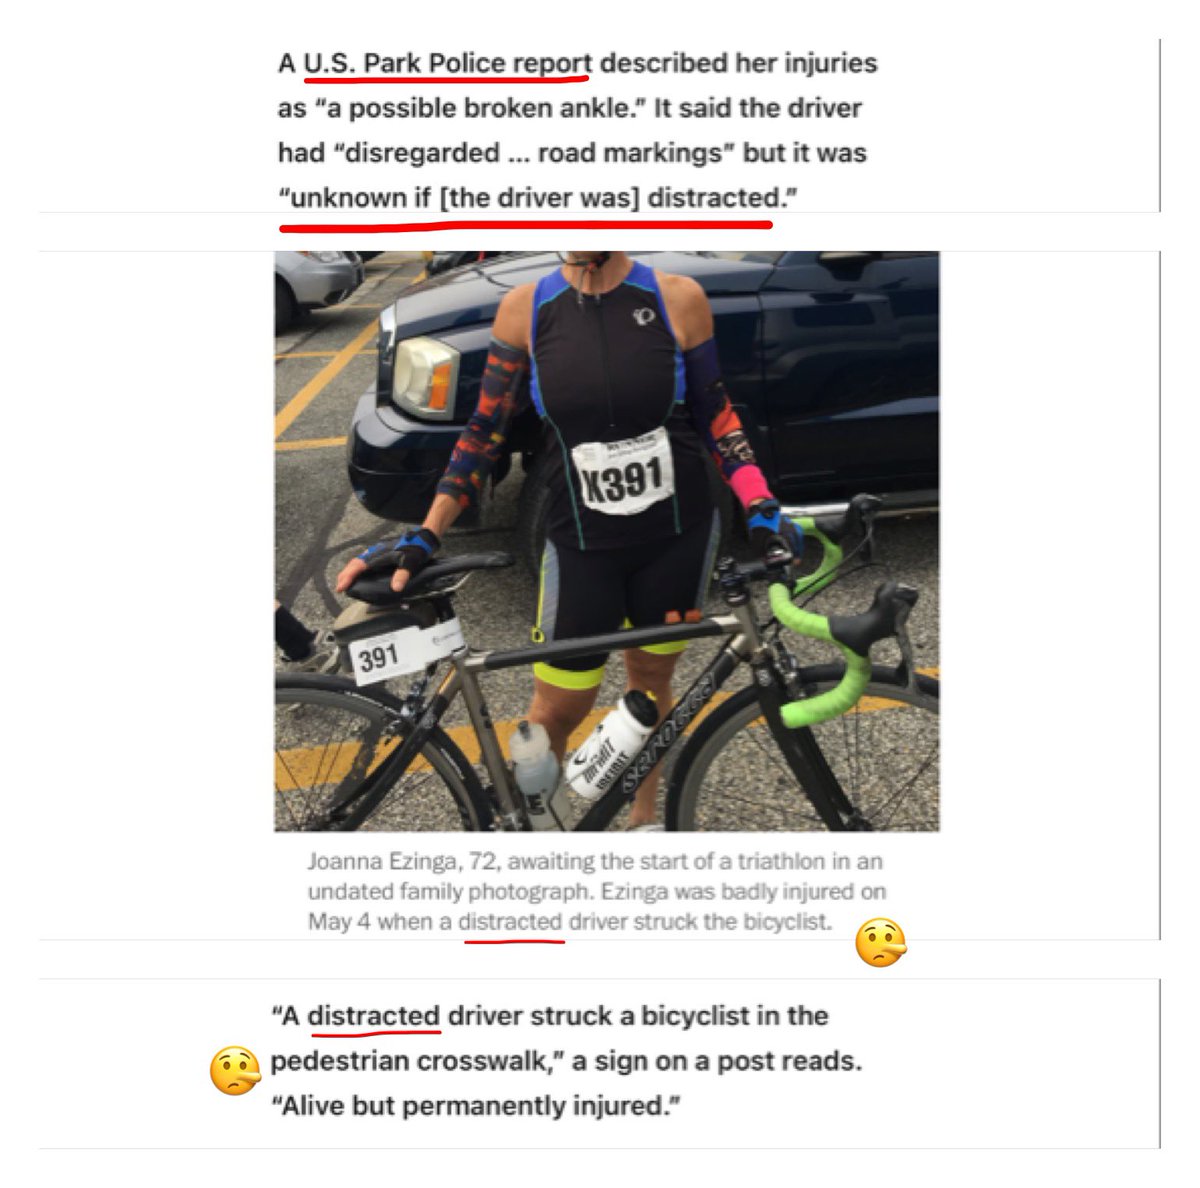 Per usual, the media (and advocacy groups) are incapable of telling the truth when their anti-car agenda is being discussed. #BikePeopleLie

The police report says it was UNKNOWN if the driver was distracted, yet the article twice implies the driver was! #BadJournalism 🤥